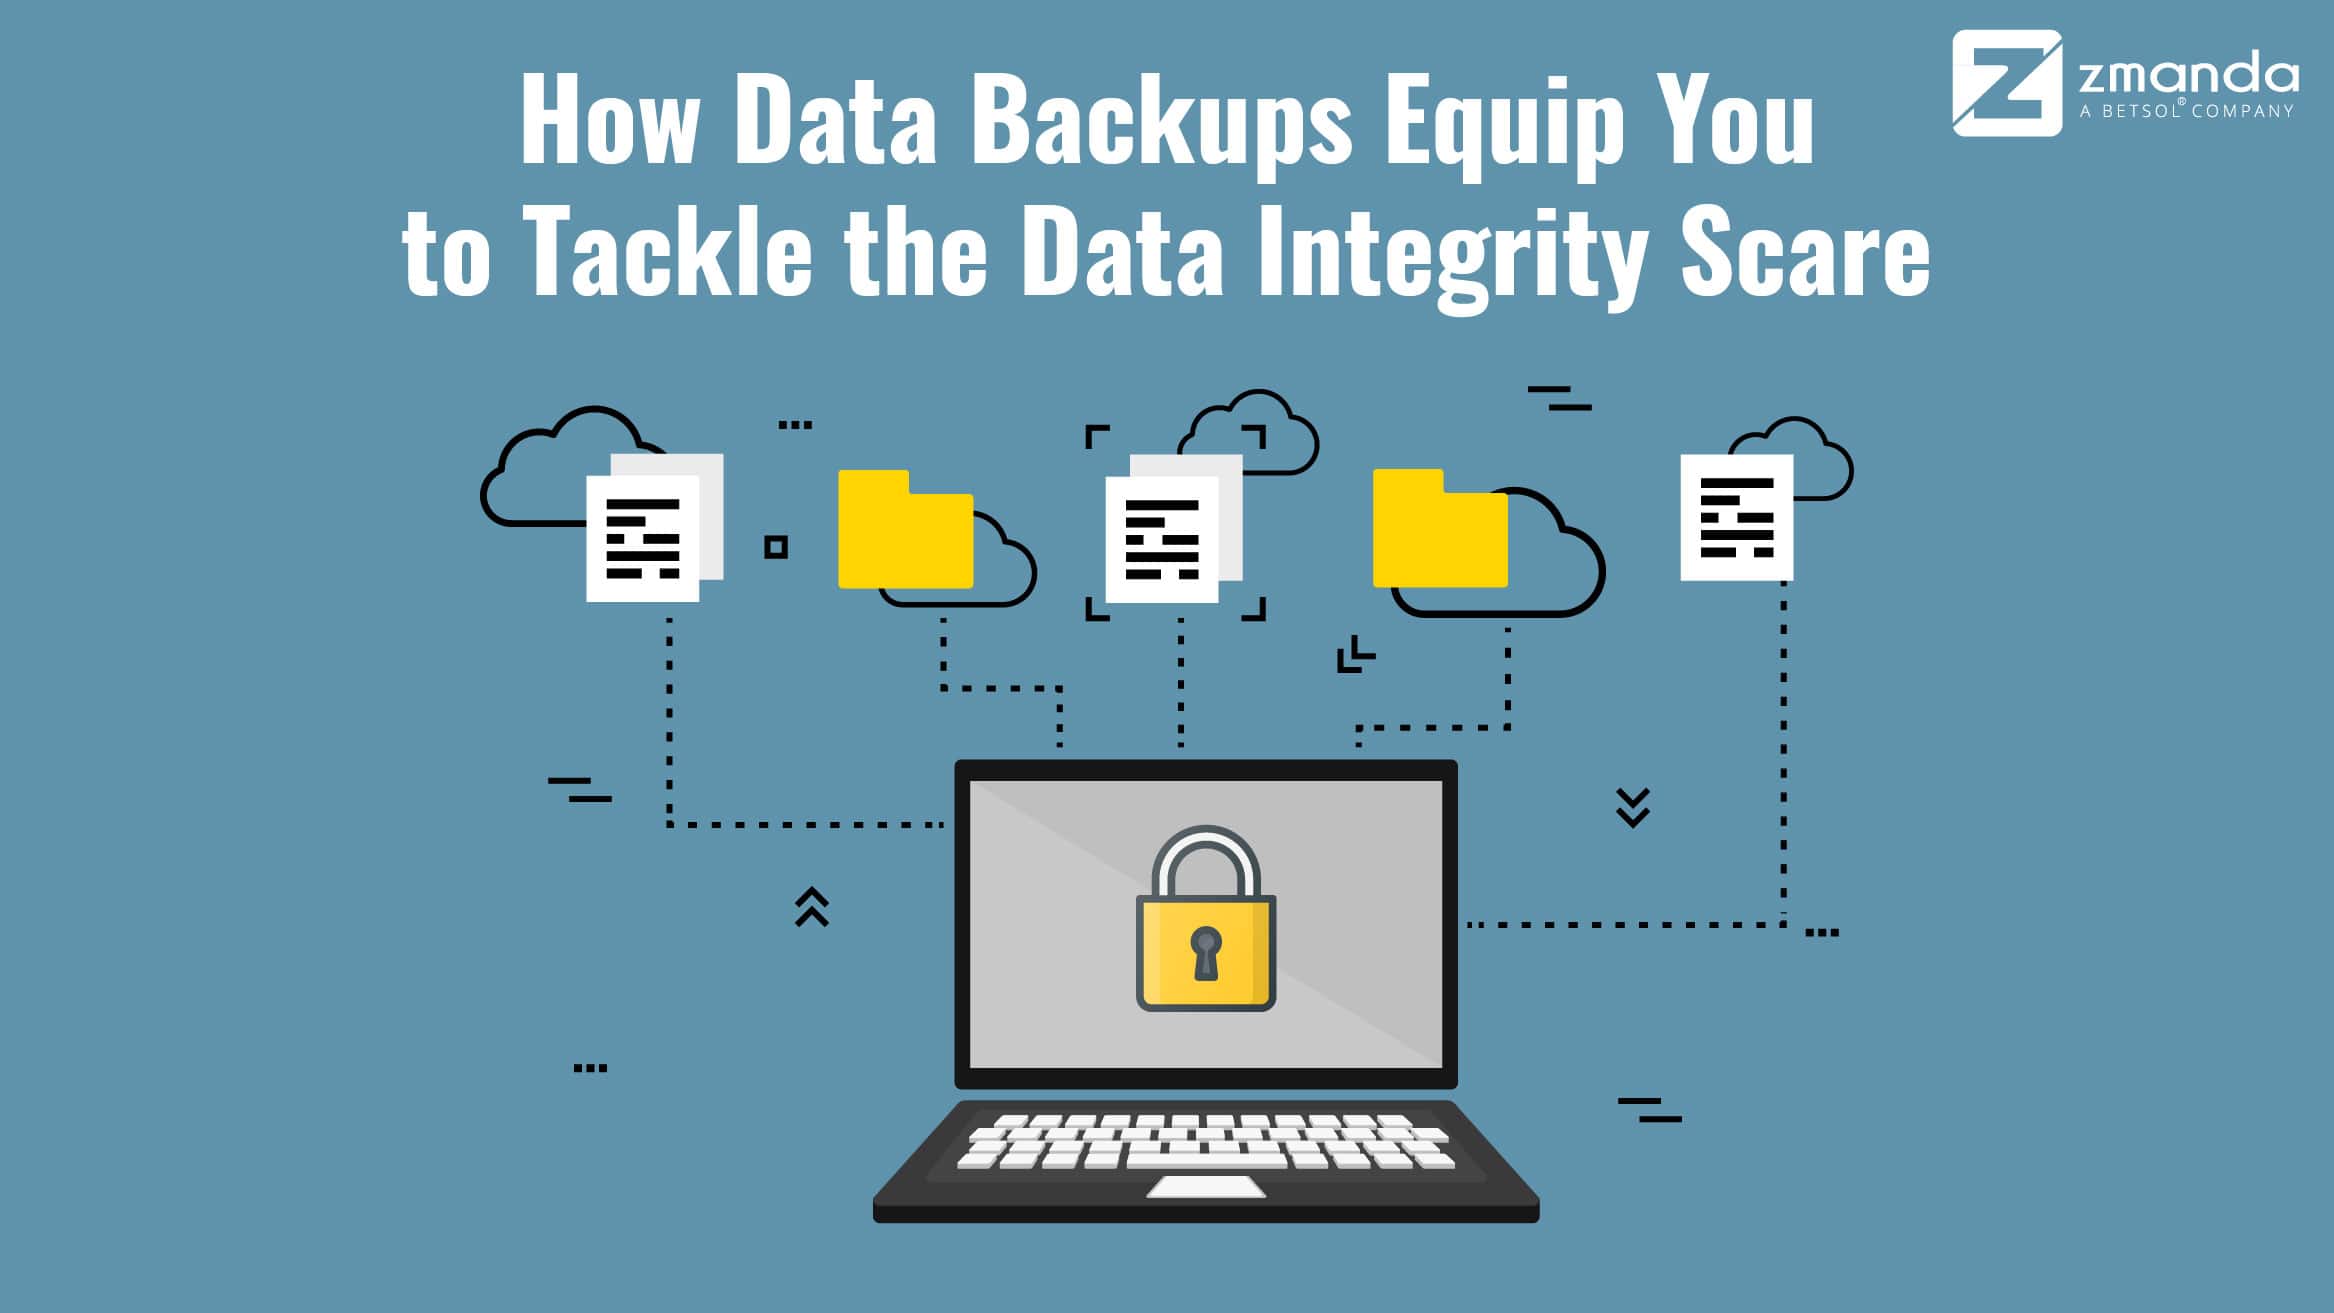 How Data Backups Equip You to Tackle the Data Integrity Scare